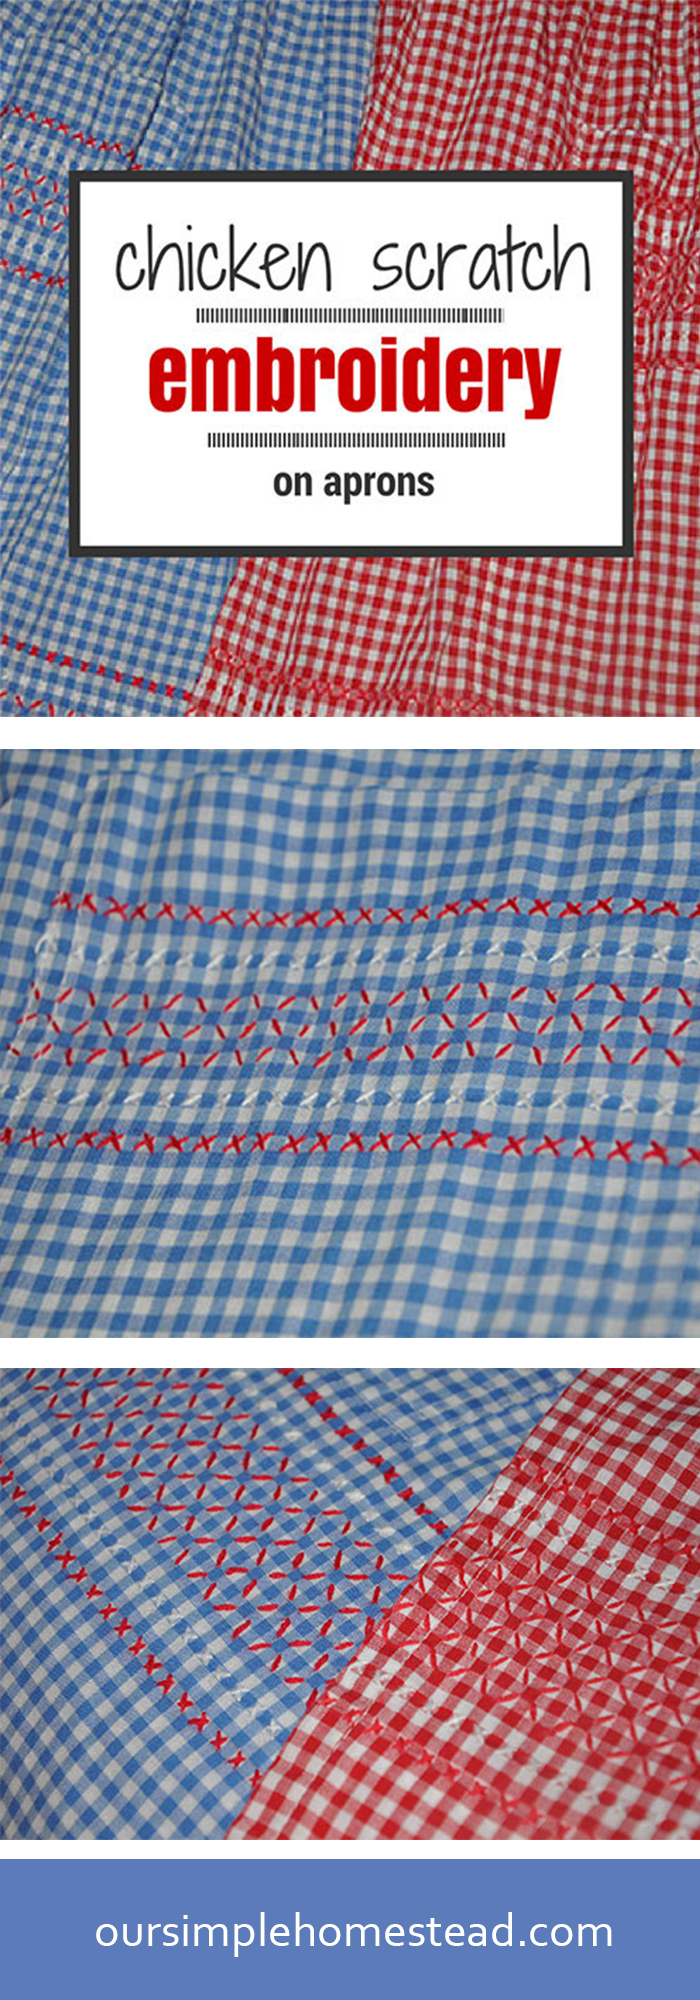 Gingham Embroidery Patterns Free Chicken Scratch Embroidery Aprons